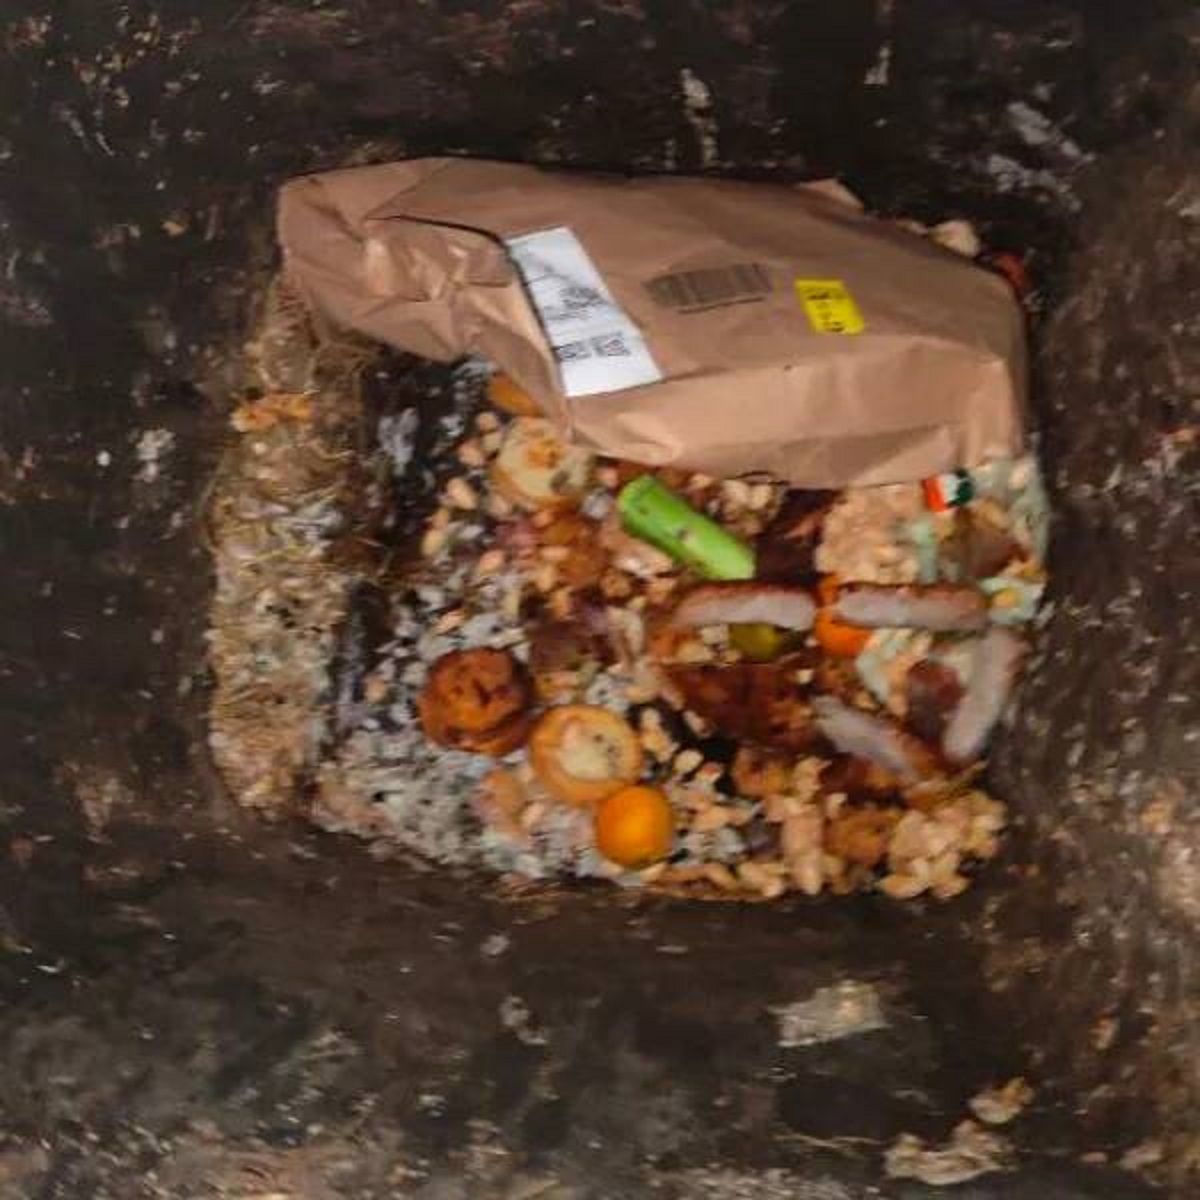 "Amazon delivered this package right into the compost bin."